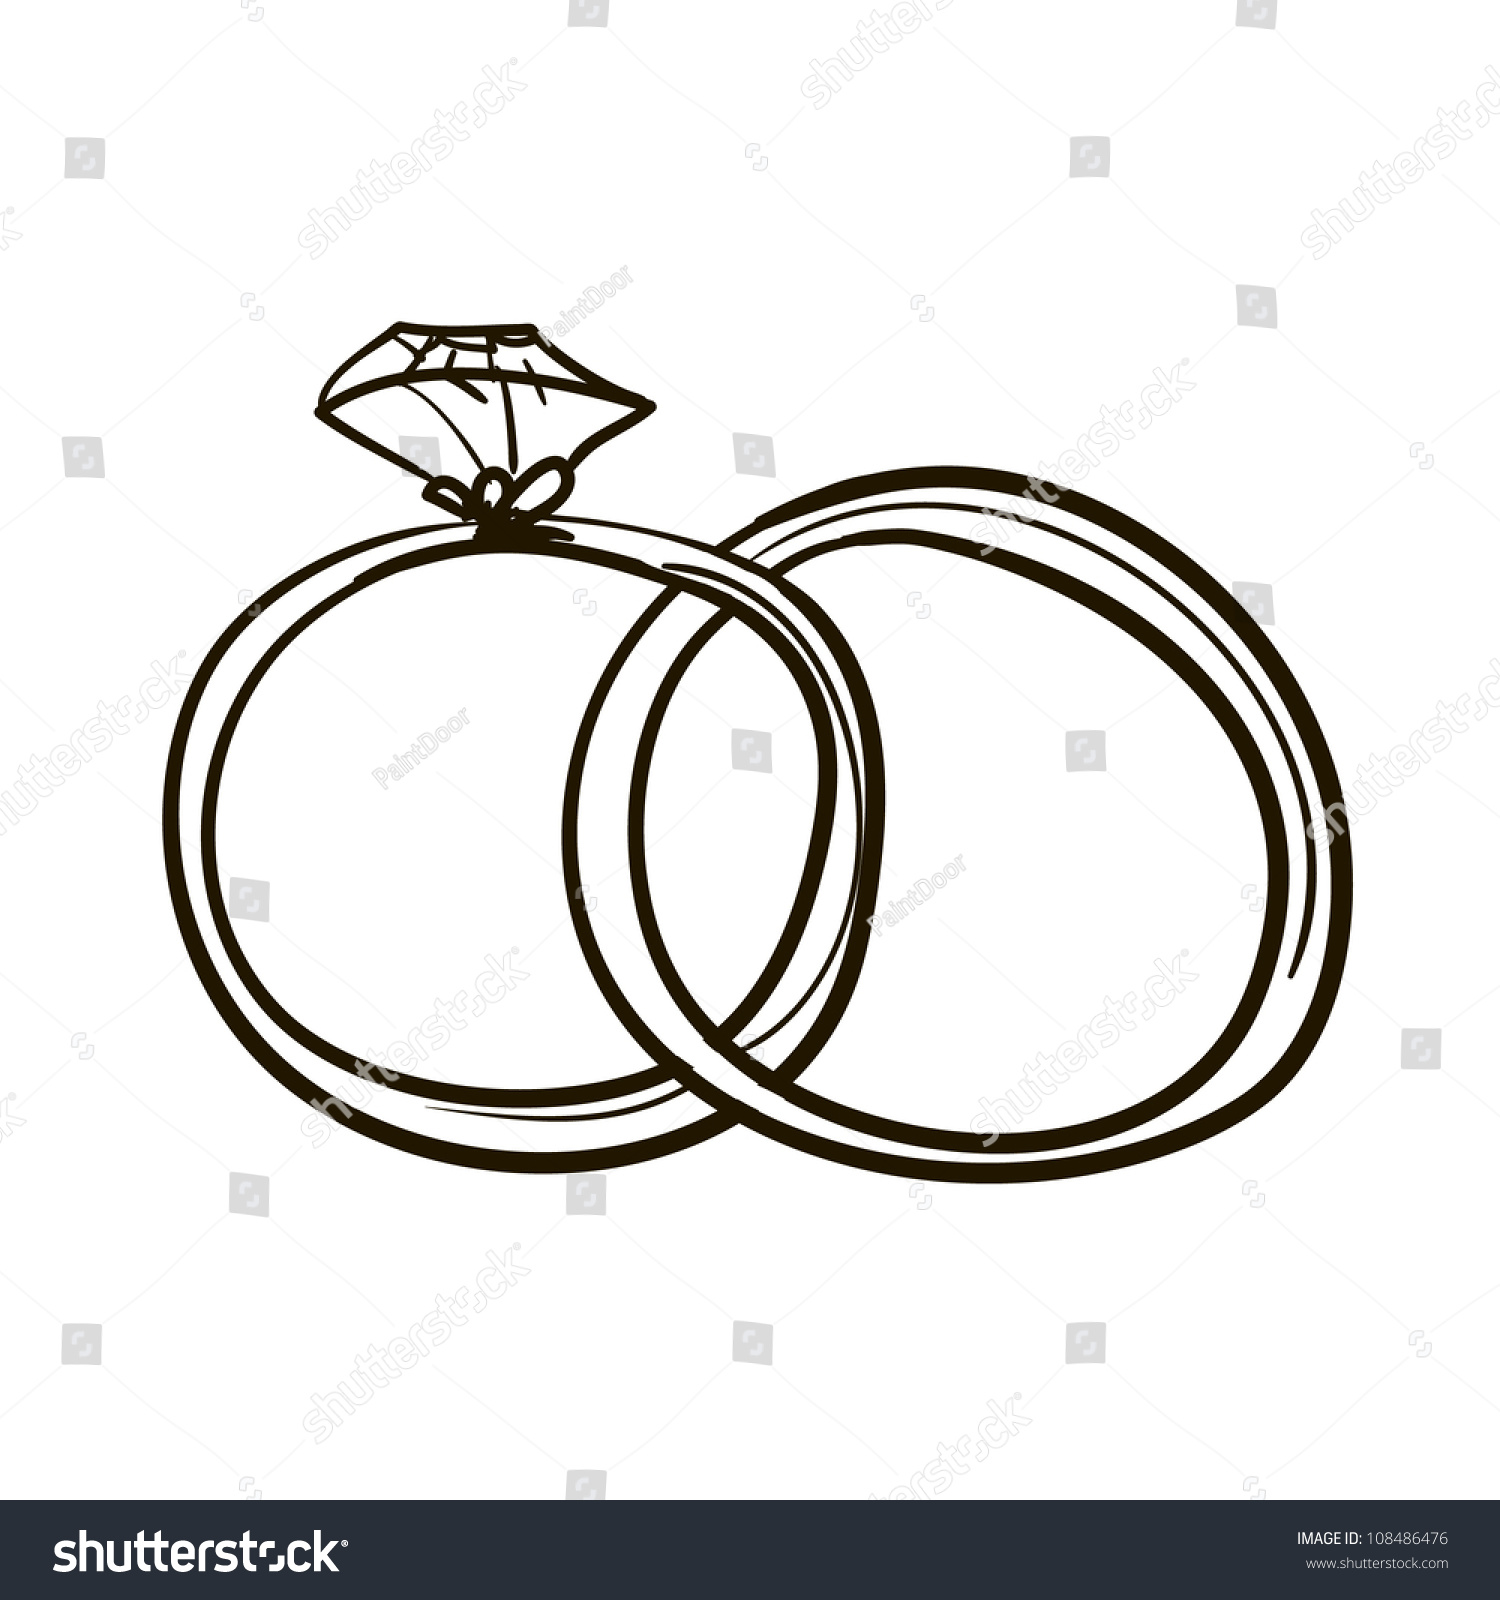 two rings clipart - photo #42